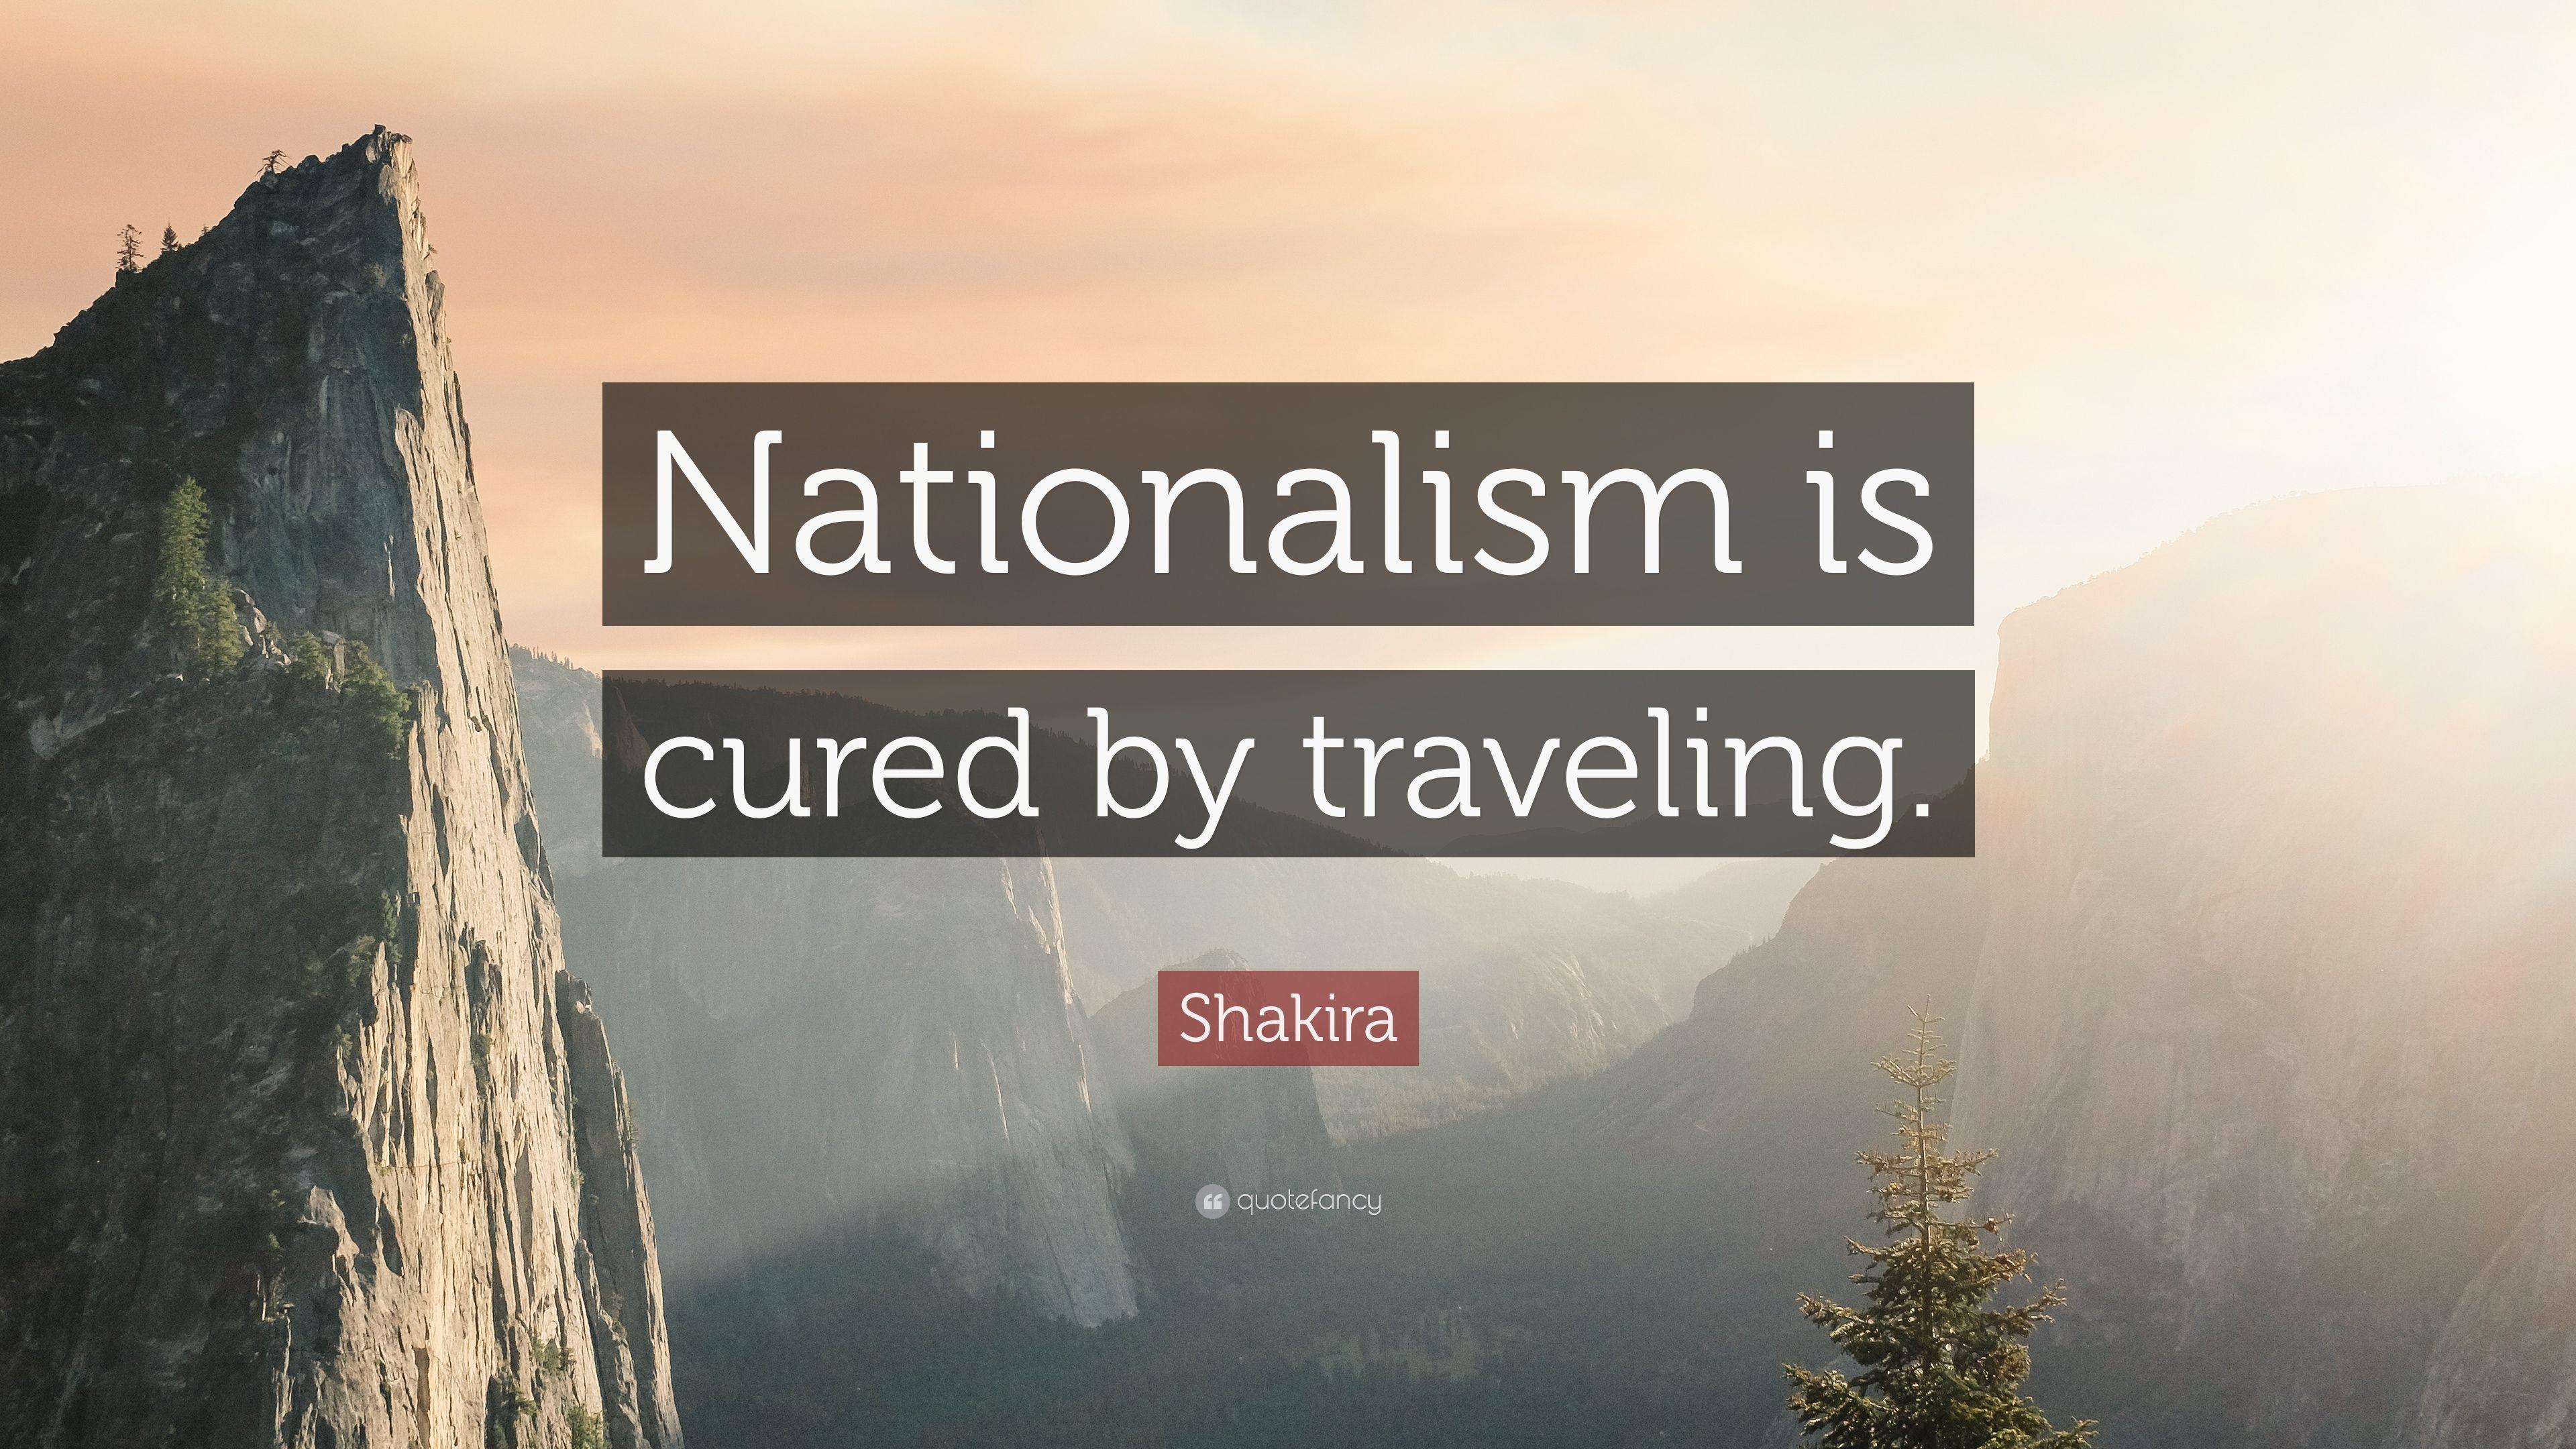 Shakira Quote: “Nationalism is cured by traveling.” 12 wallpaper